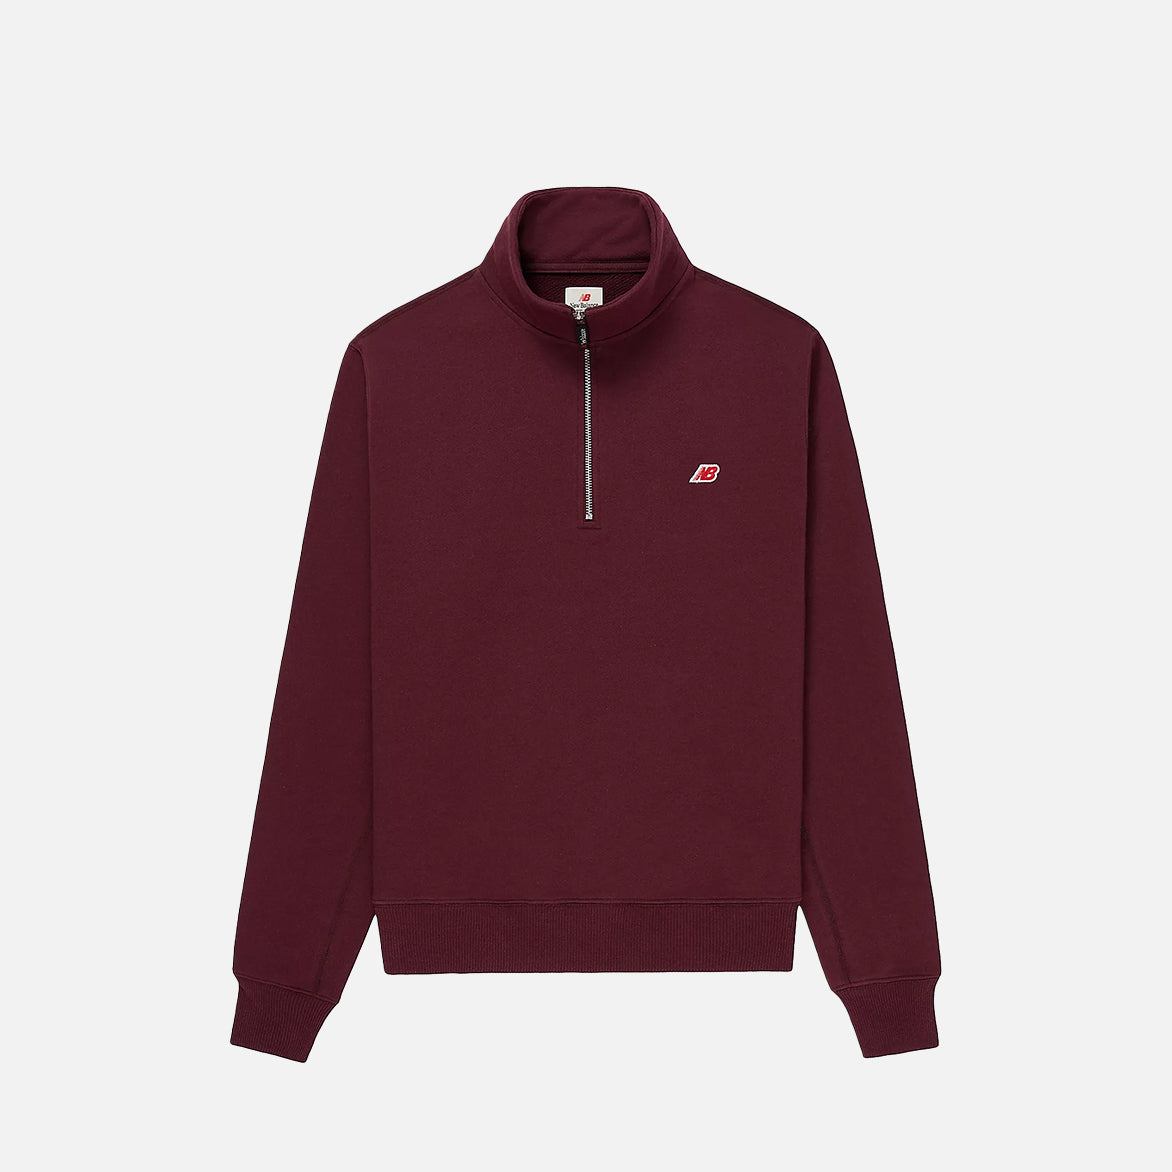 MADE IN USA QUARTER ZIP PULLOVER - BURGUNDY